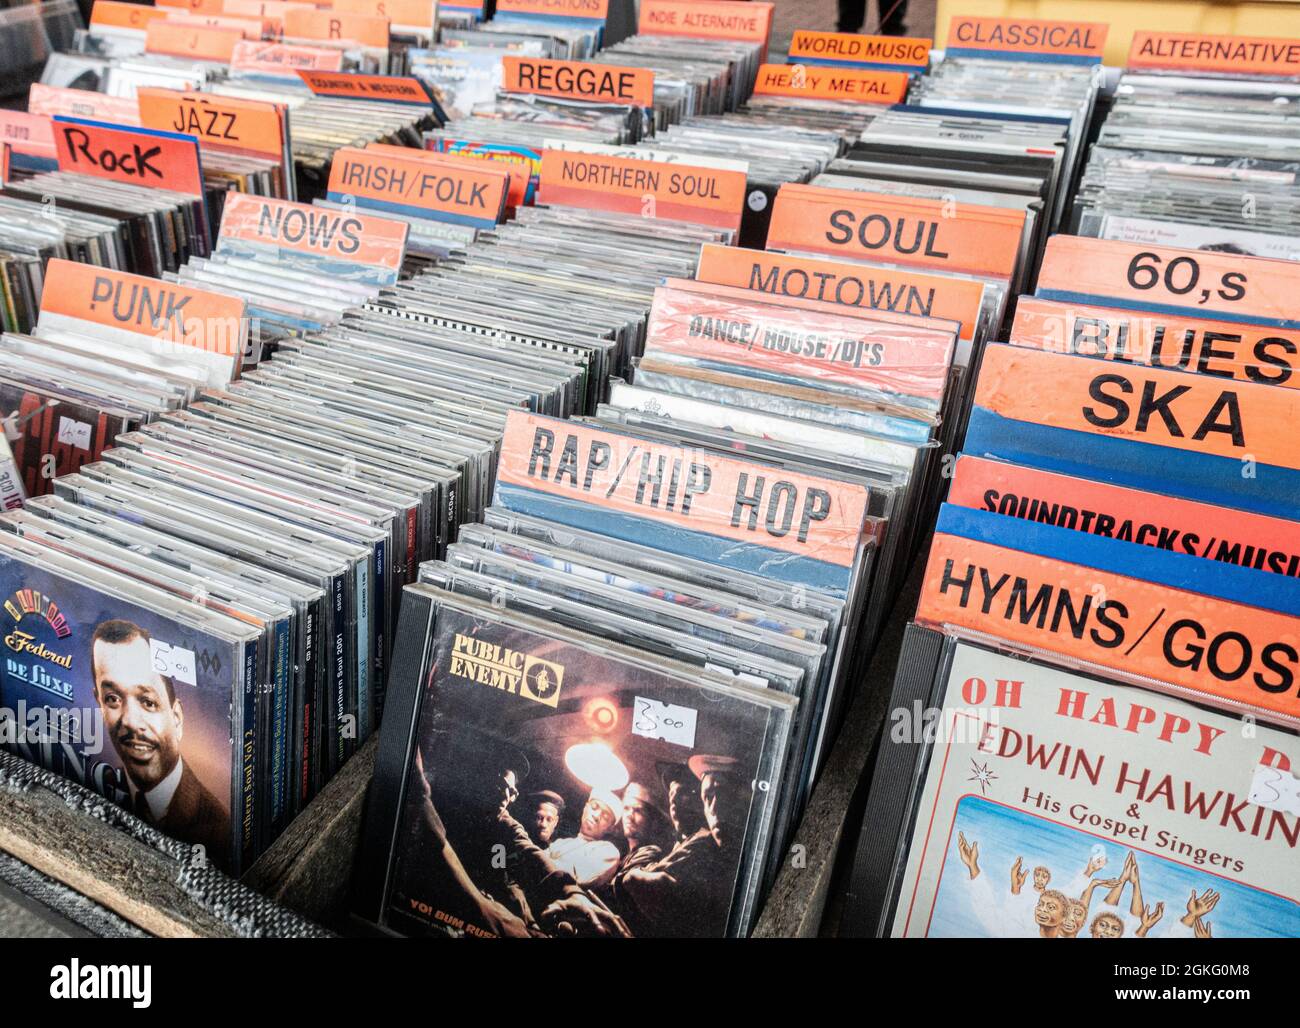 Music CDs in music, record store Stock Photo